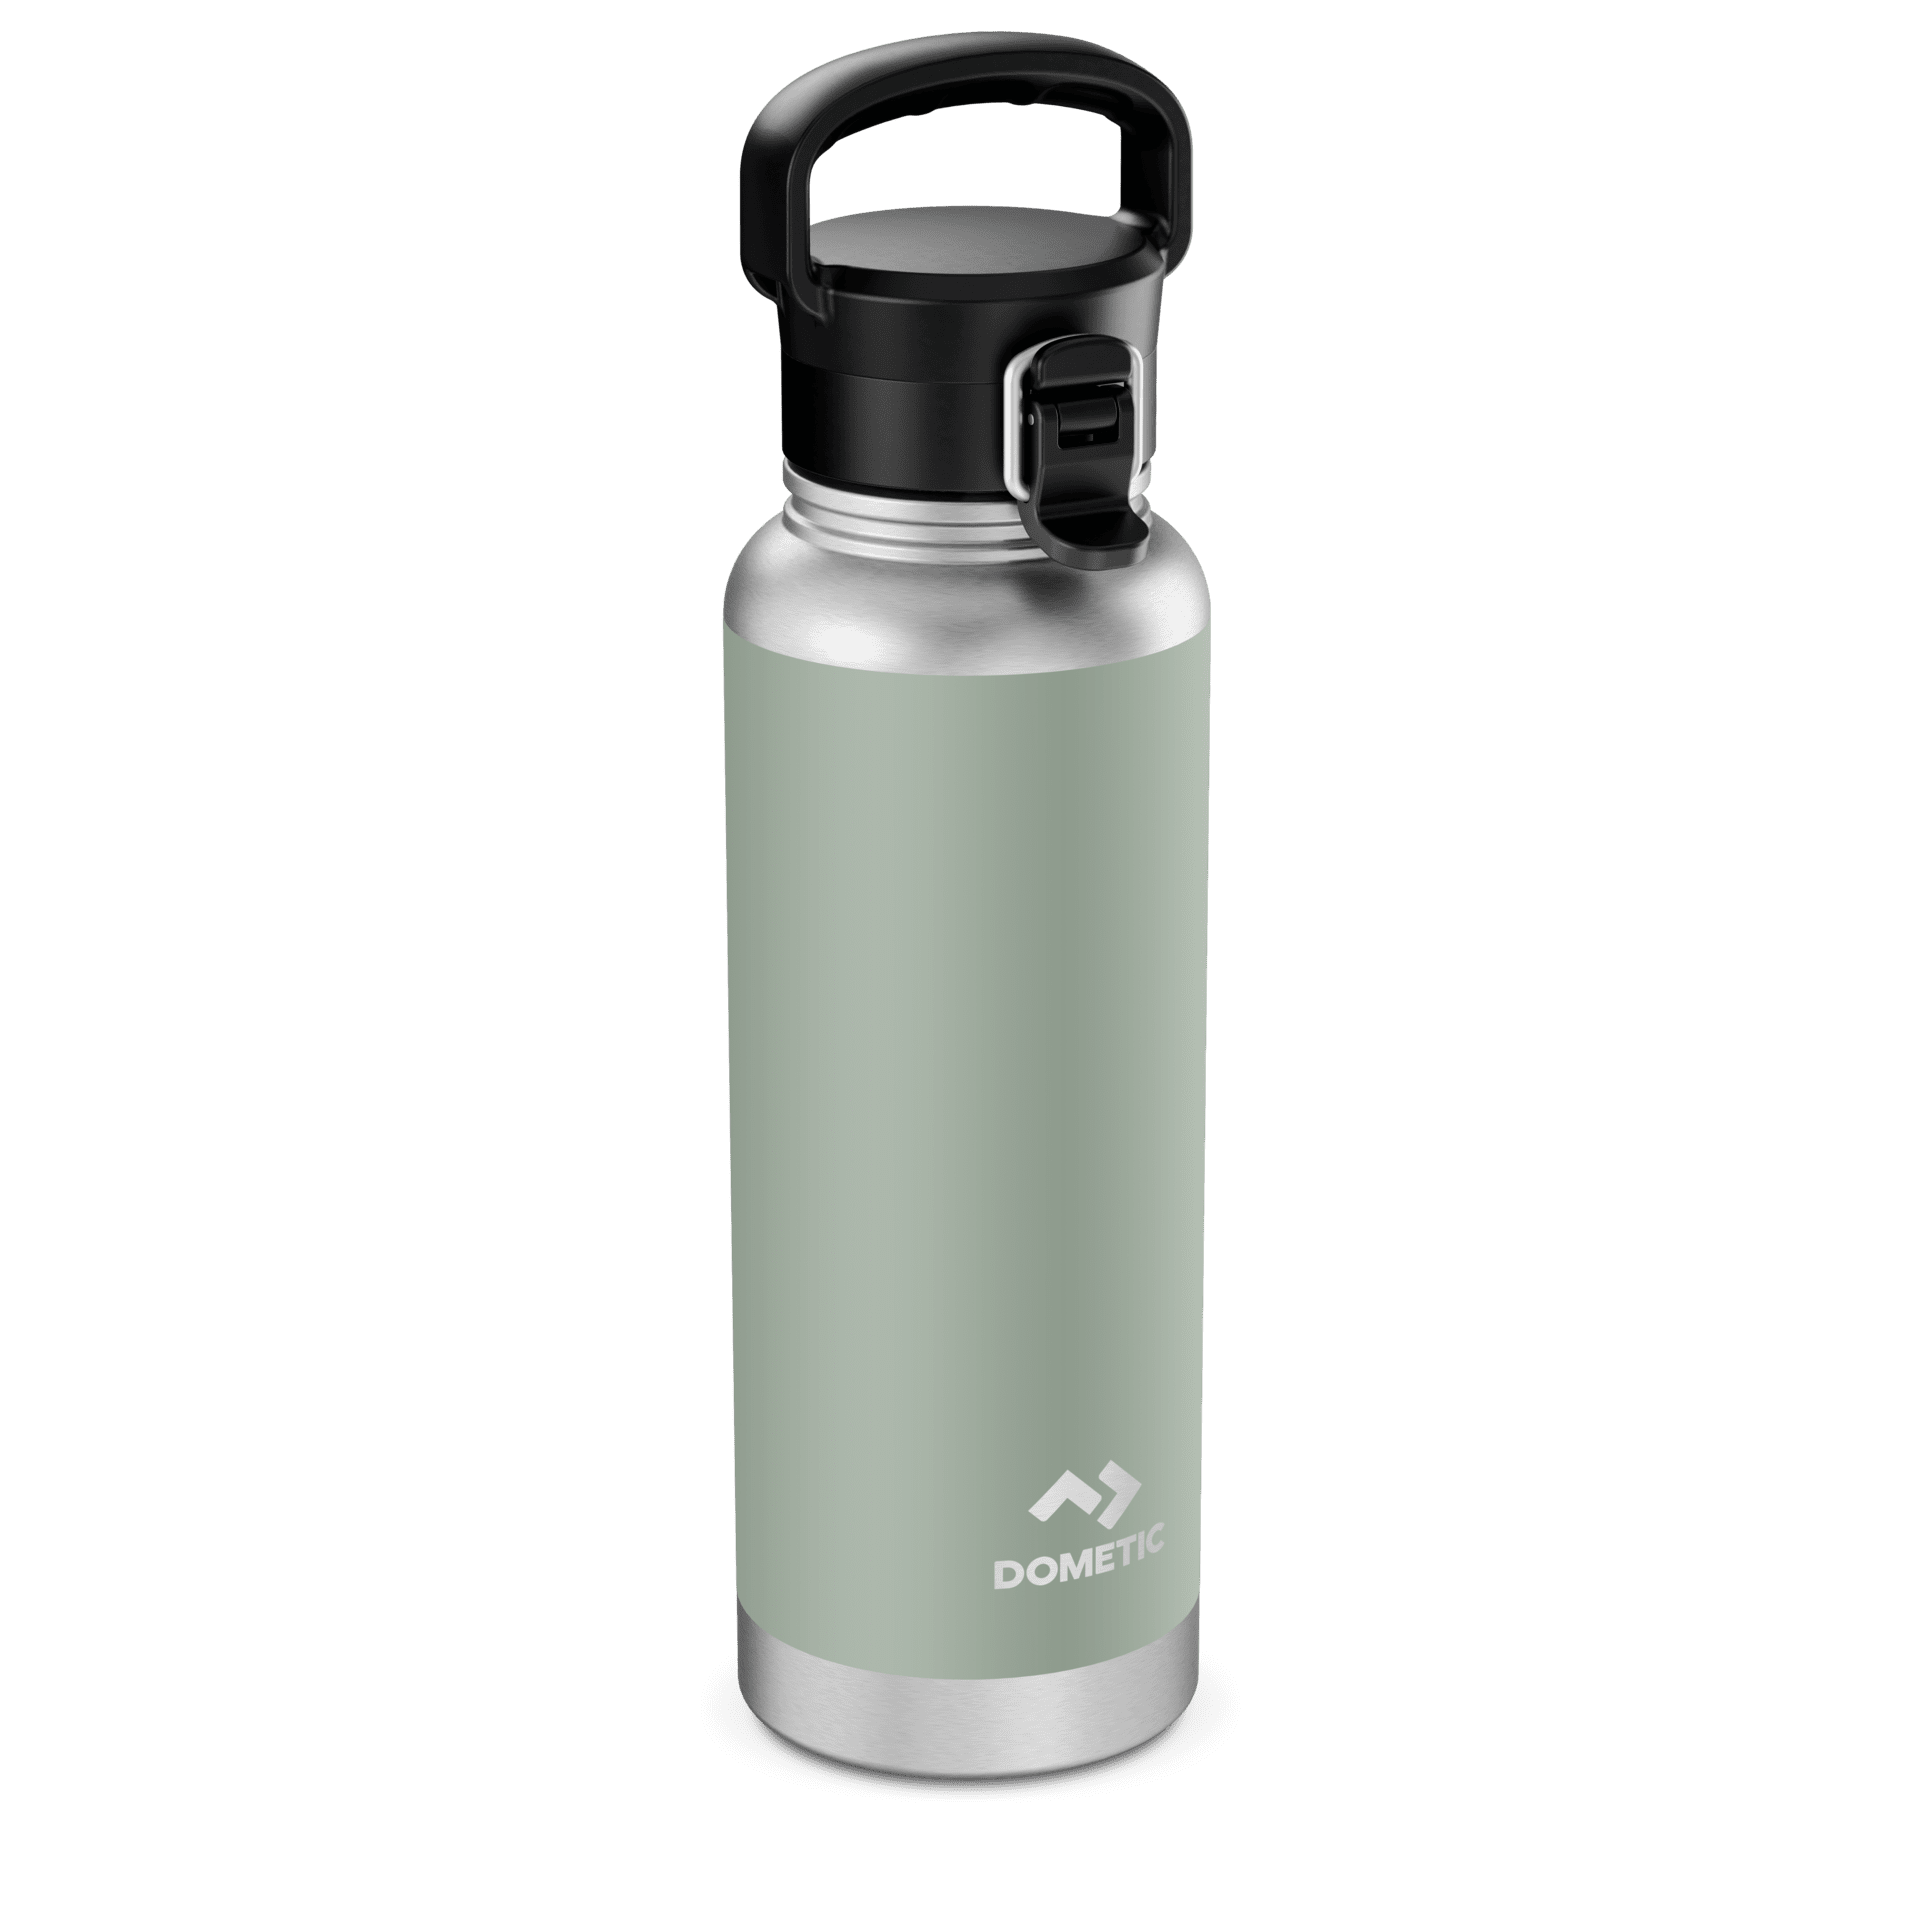 https://www.dometic.com/externalassets/dometic-thermo-bottle-120_9600050941_82884.png?ref=2106555705